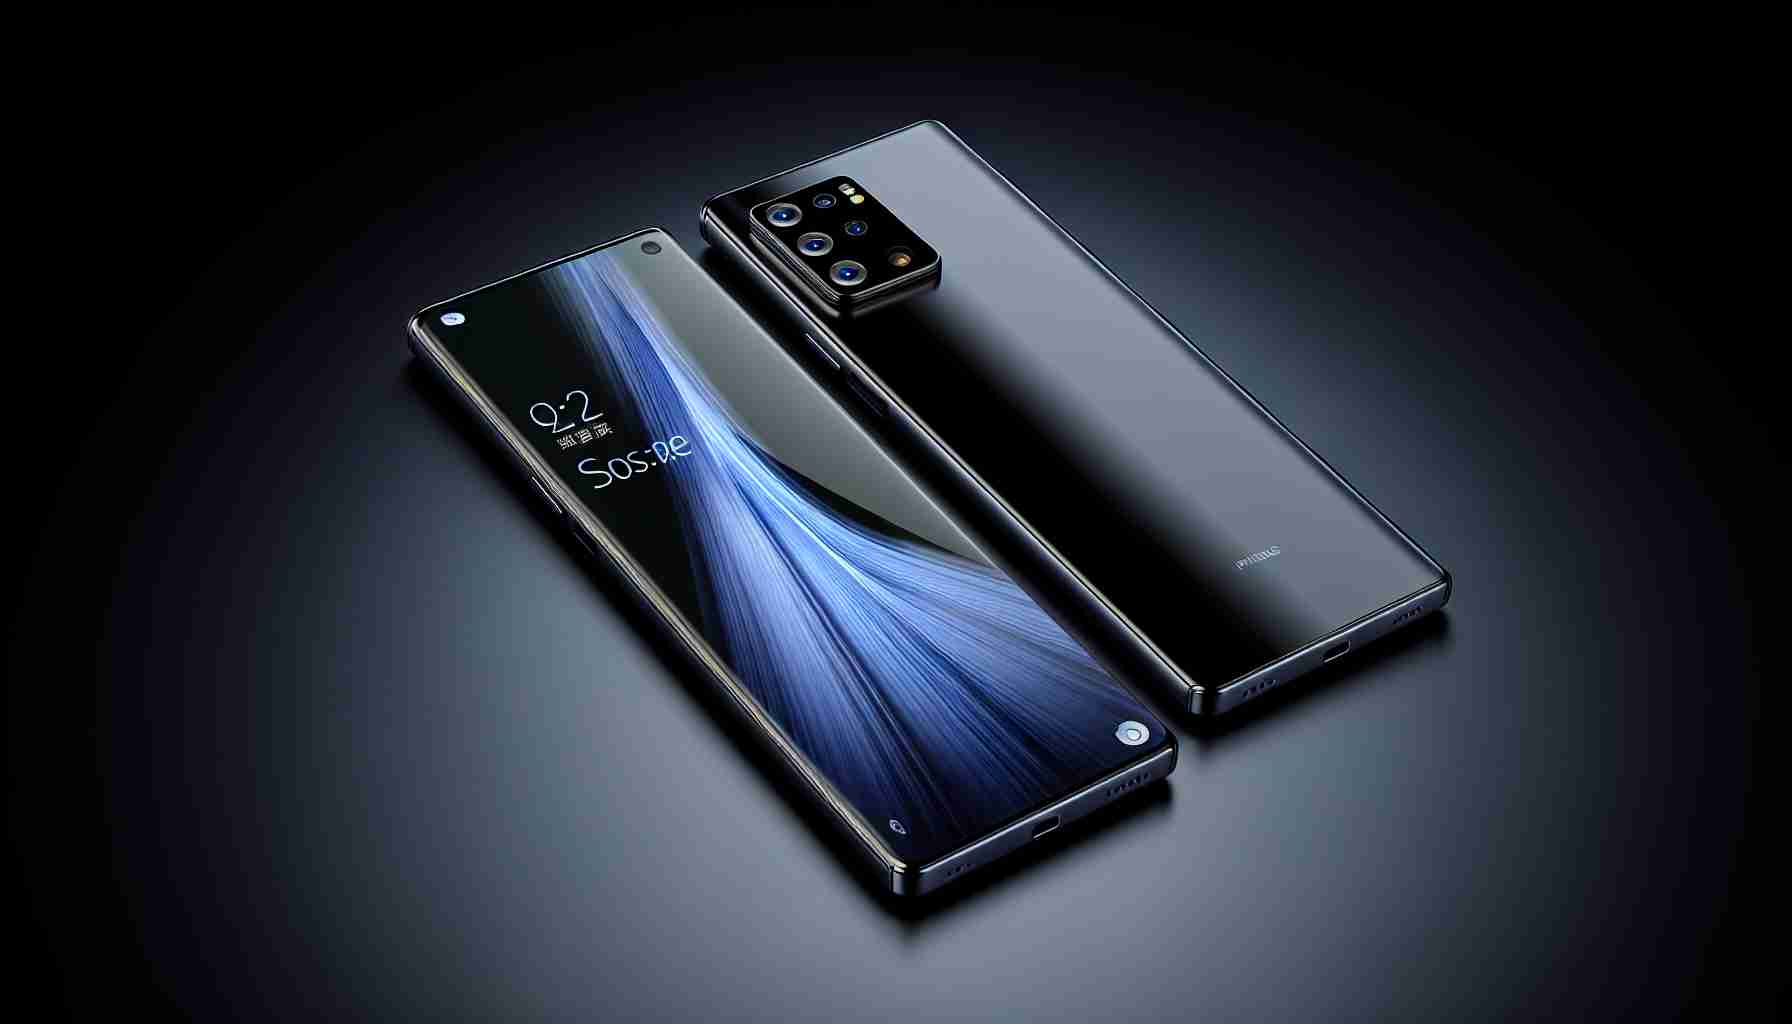 The Revival of Sony’s Smartphone Lineup: Xperia 1 VI Marks a Return to Form